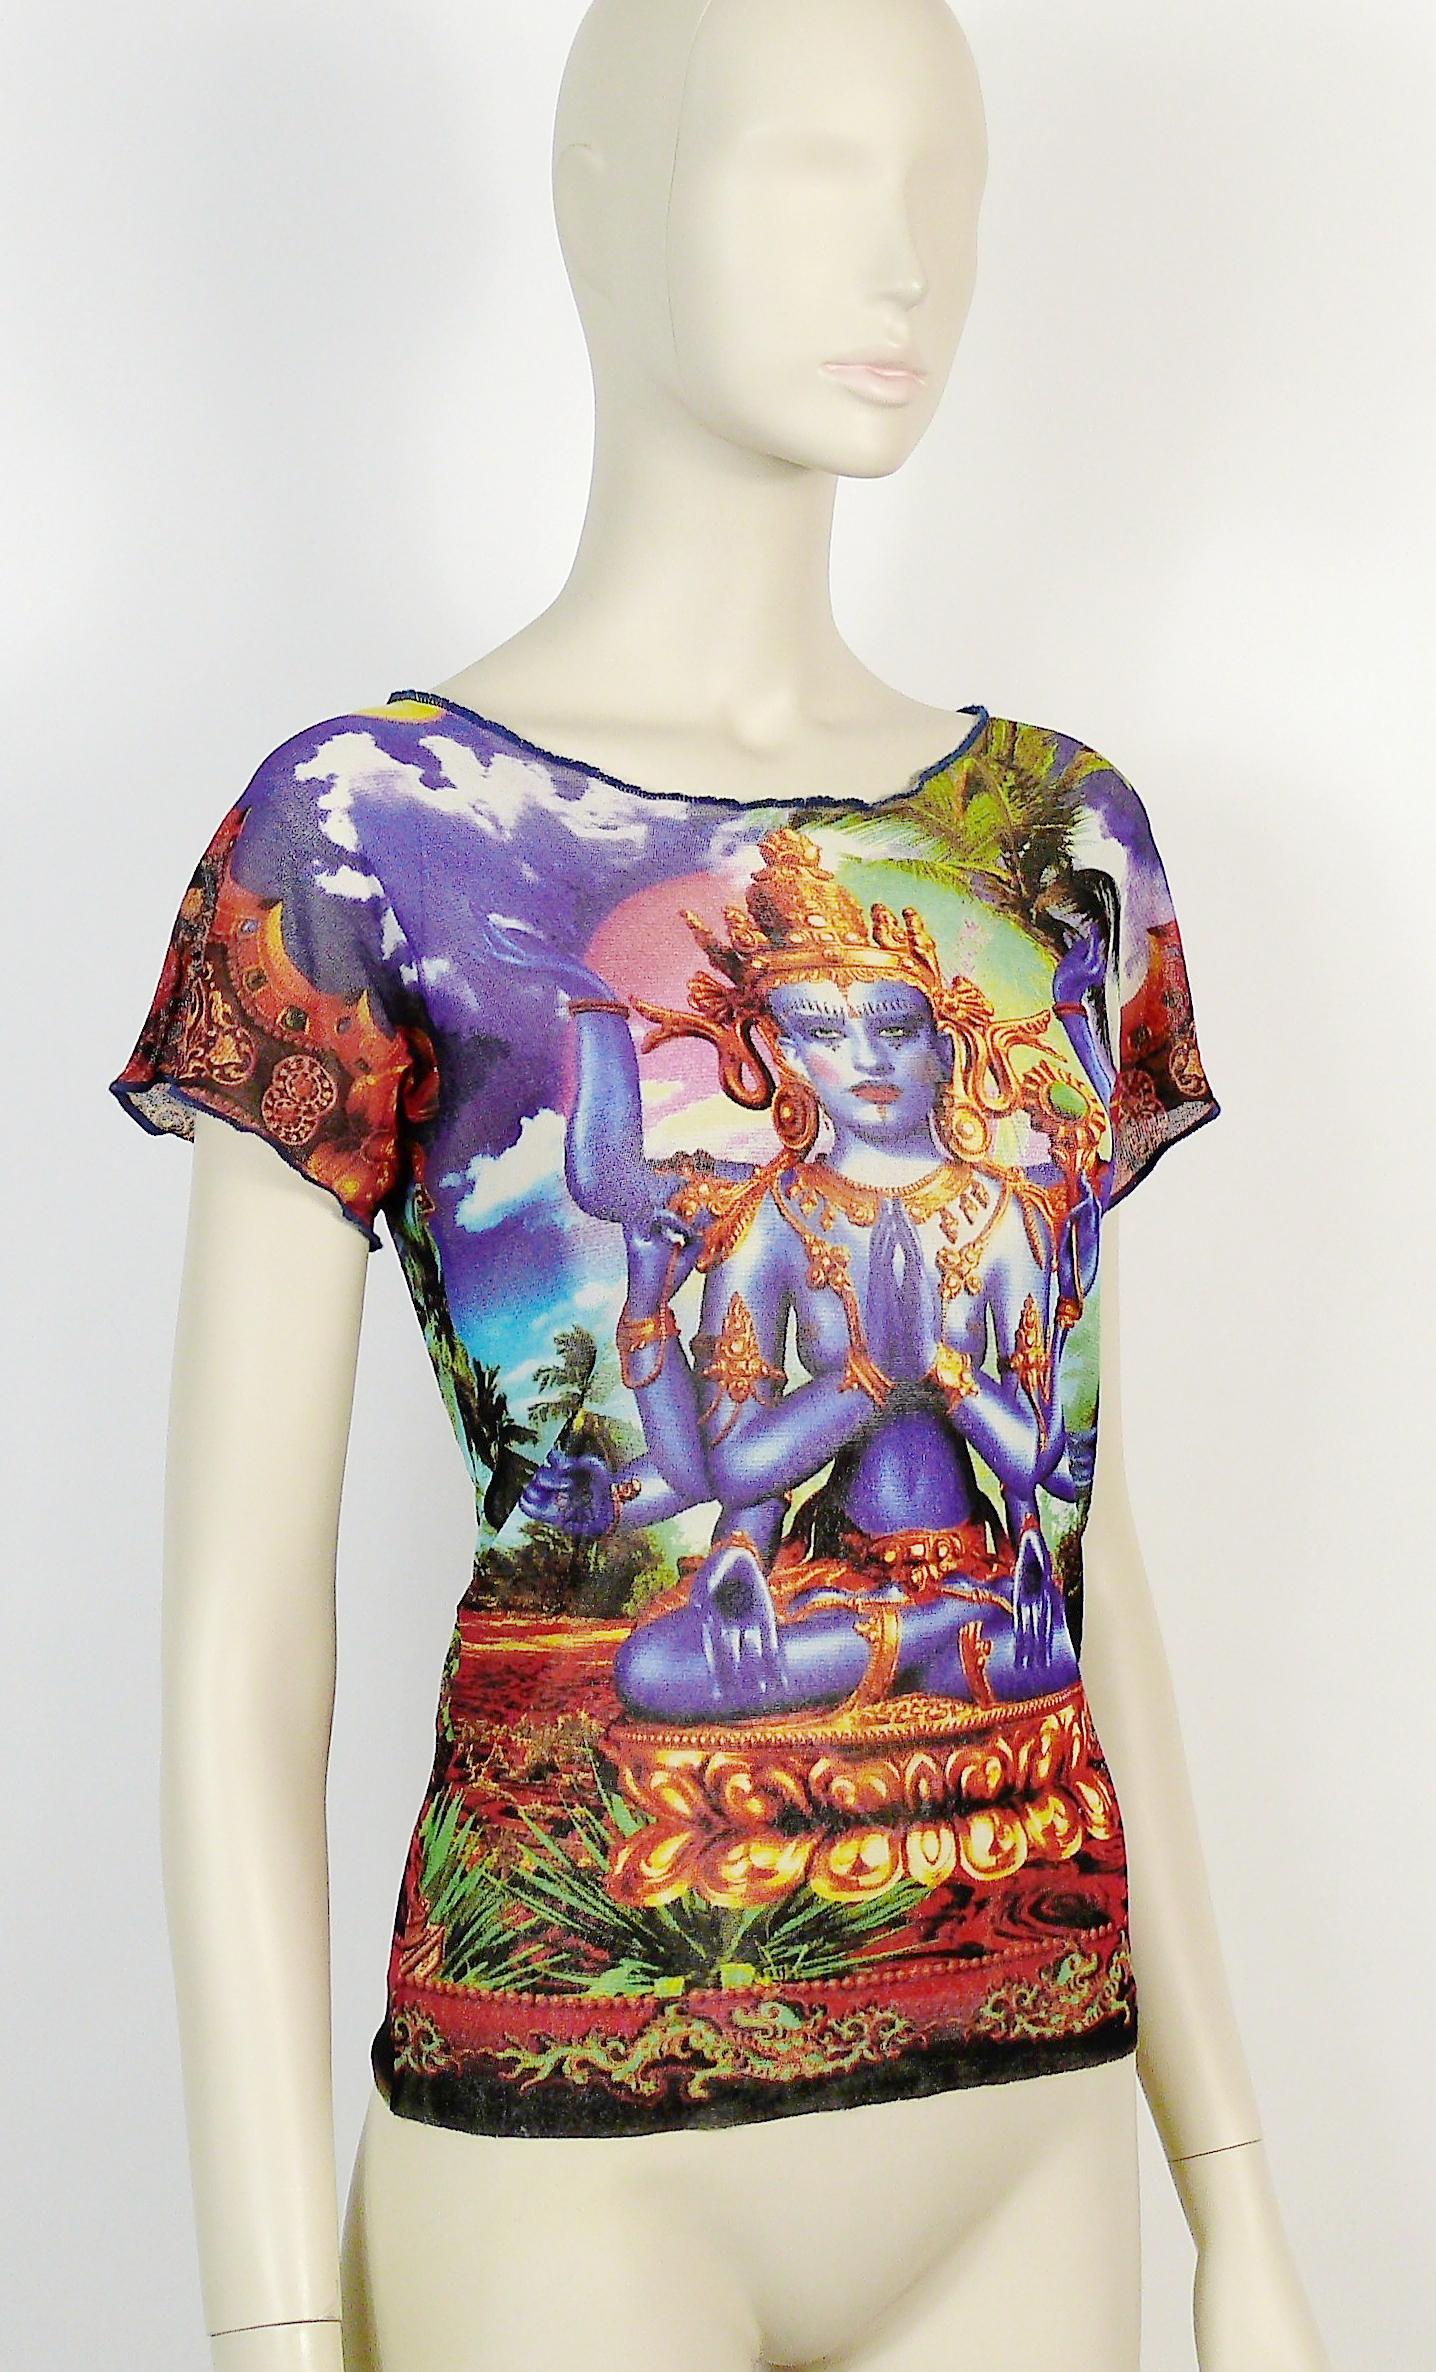 JEAN PAUL GAULTIER vintage short sleeve sheer mesh top featuring an Hindu deity print in vibrant colors.

Label reads JEAN PAUL GAULTIER MAILLE.
Made in Italy.

Size label reads : S.
Please check measurements.

Composition tag reads : 100%